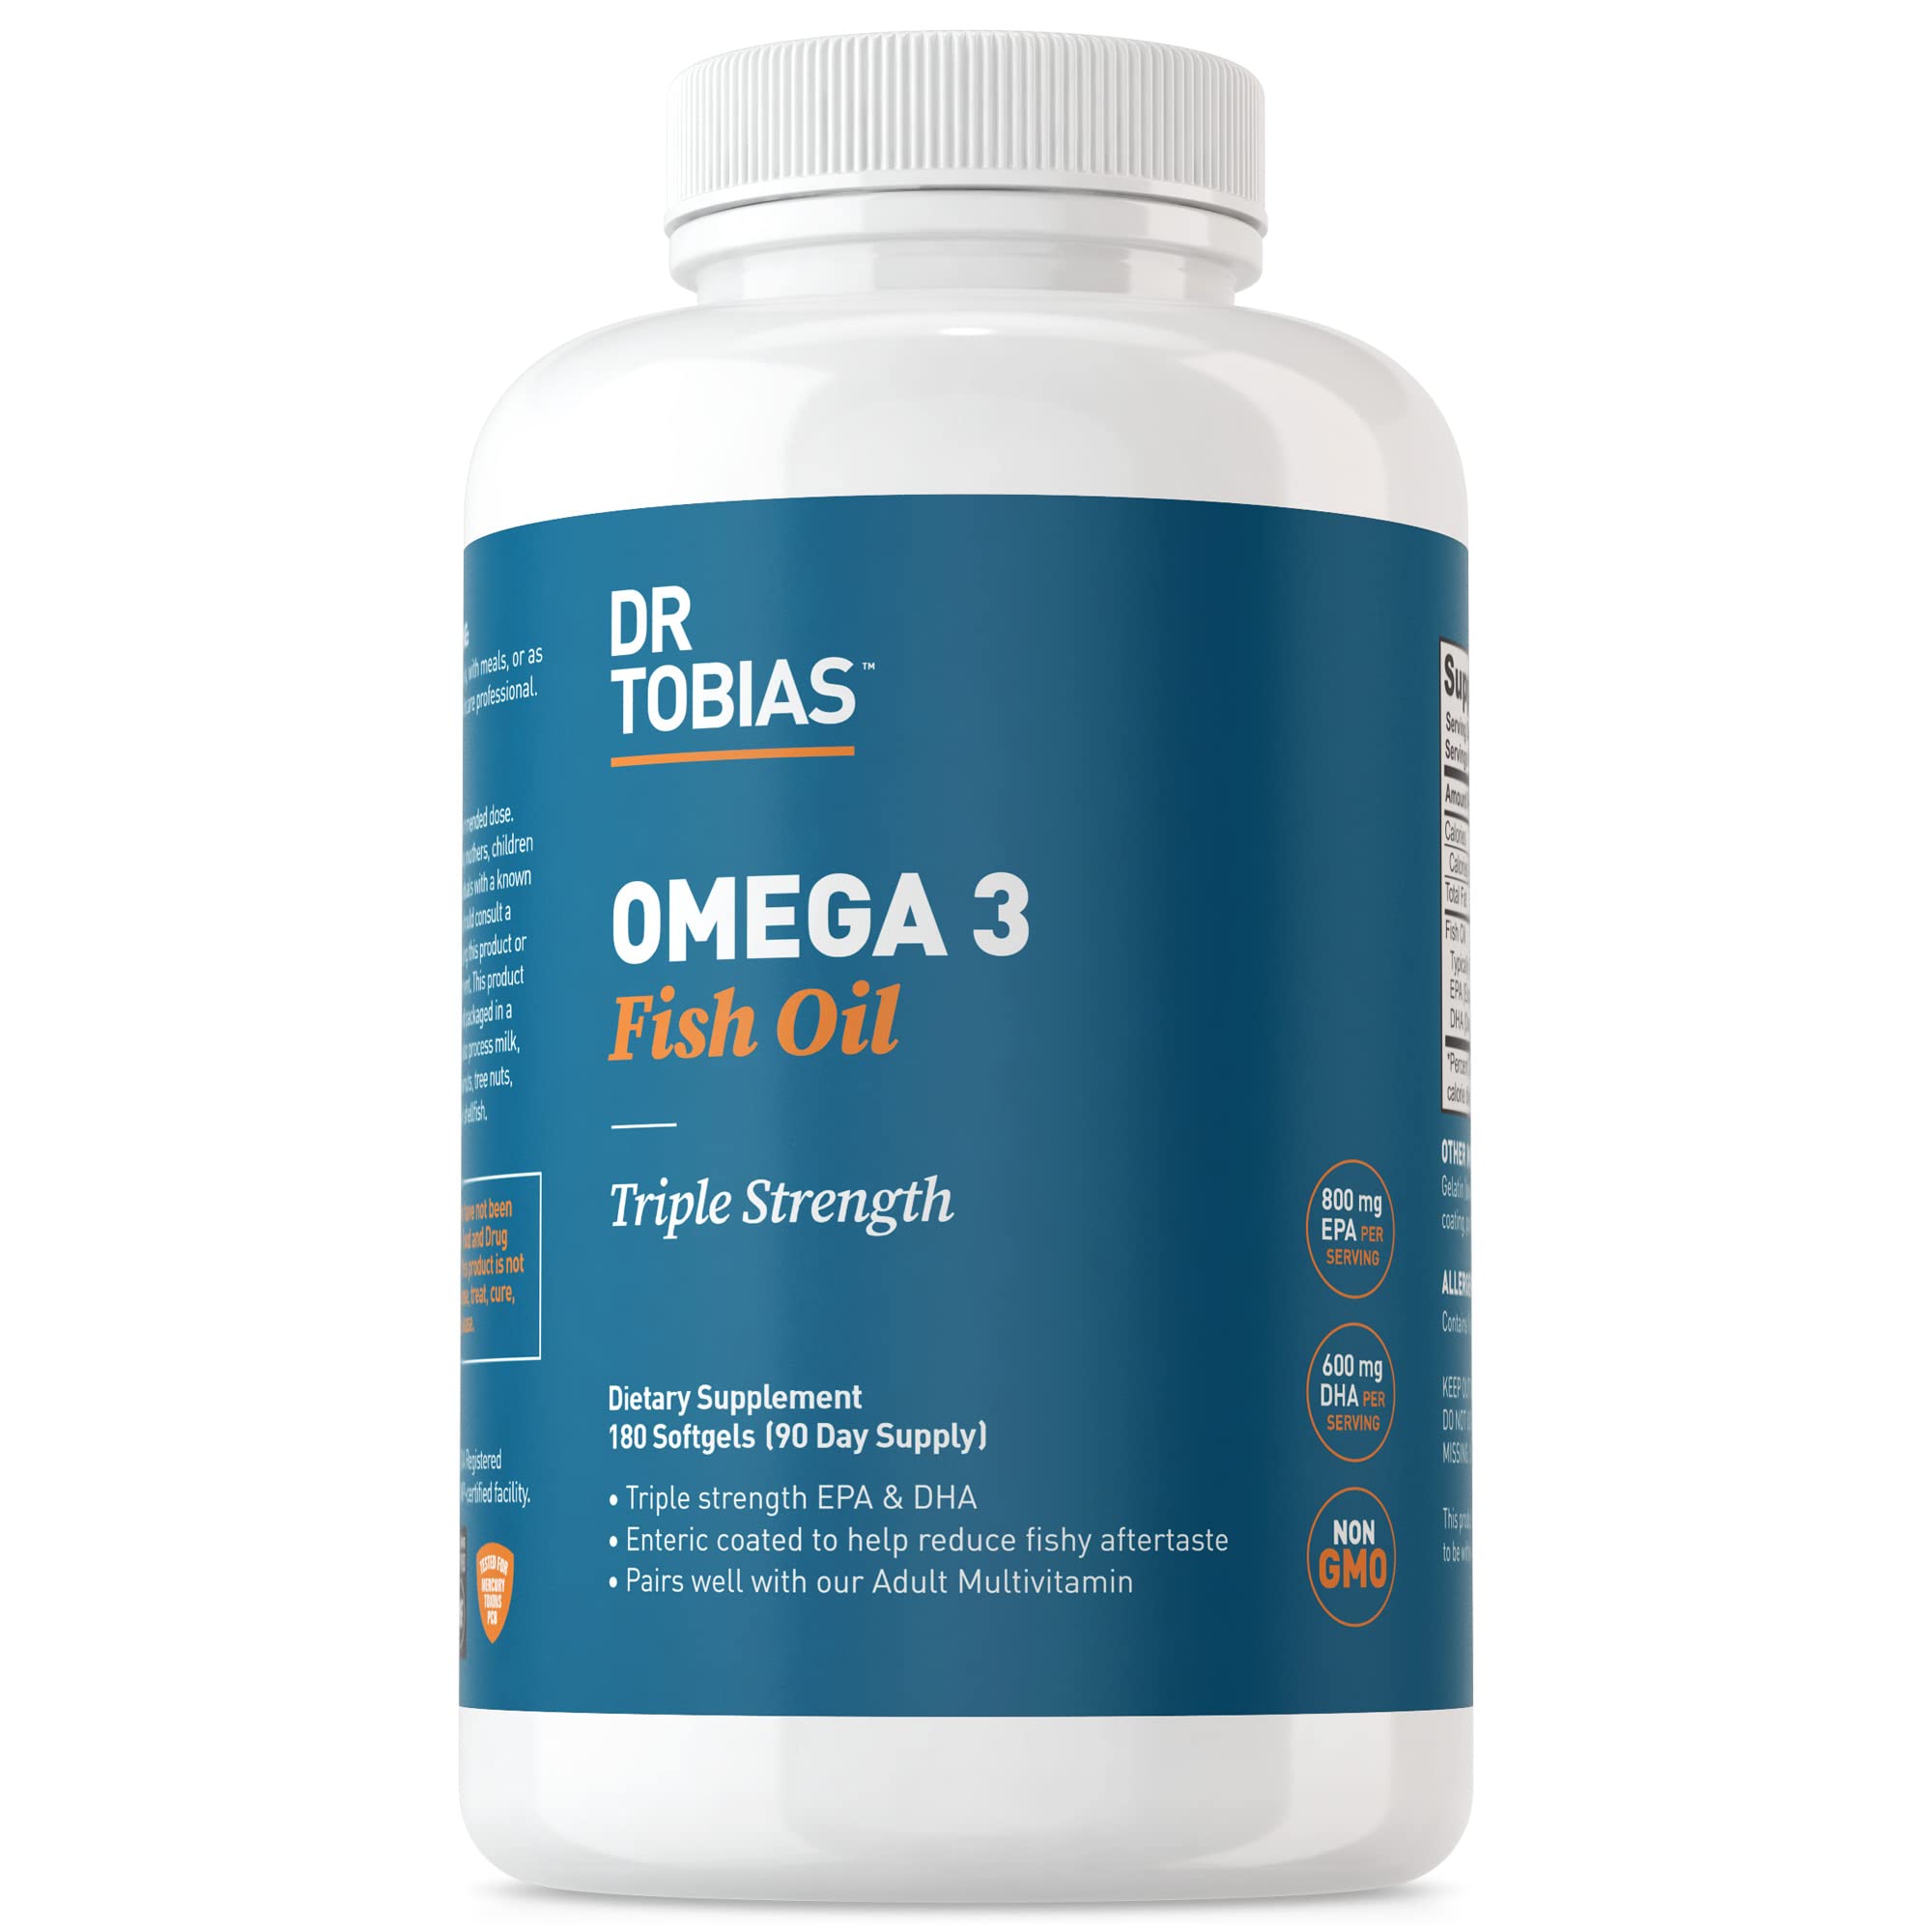 Dr. Tobias Omega 3 Fish Oil, 800 mg EPA 600 mg DHA Omega 3 Supplement for Heart, Brain & Immune Support, Absorbable Triple Strength Fish Oil Supplements - 2000 mg Per Serving, 180 Softgels, 90 Servings